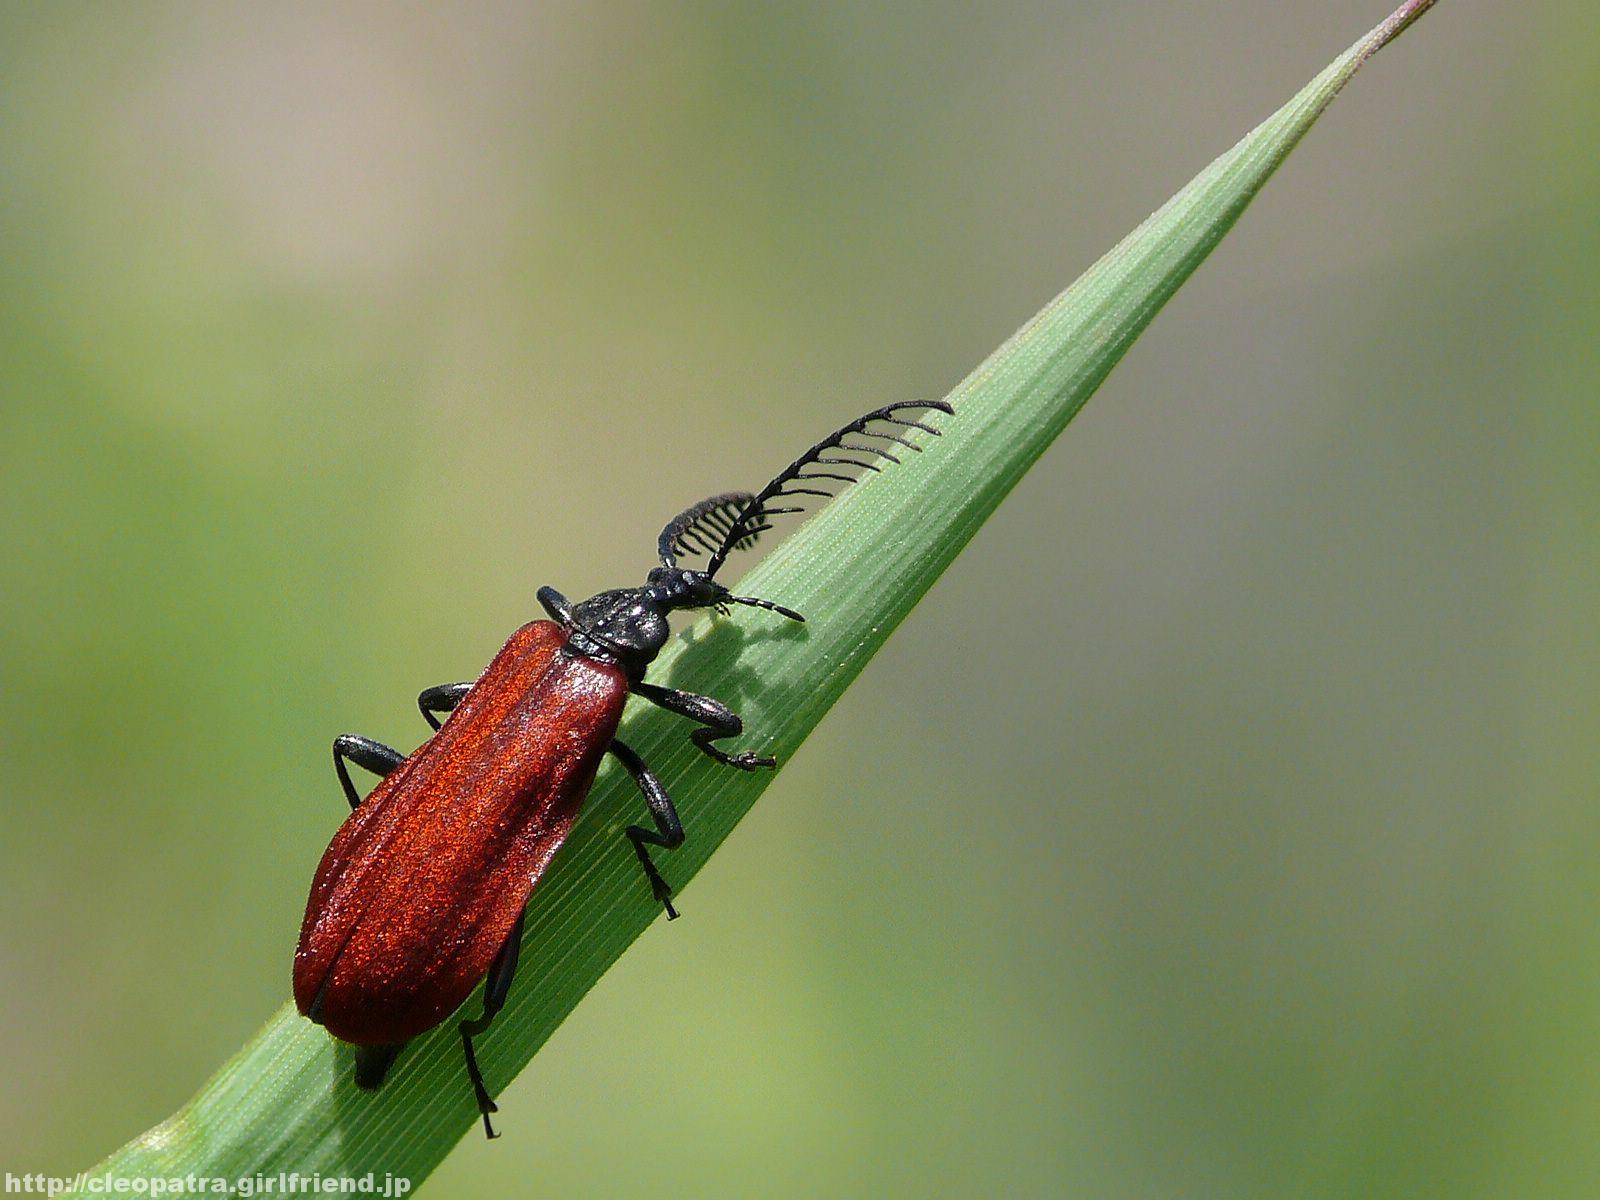 Fire Coloured Beetle 赤い背中をした虫 3323s Insects Nature